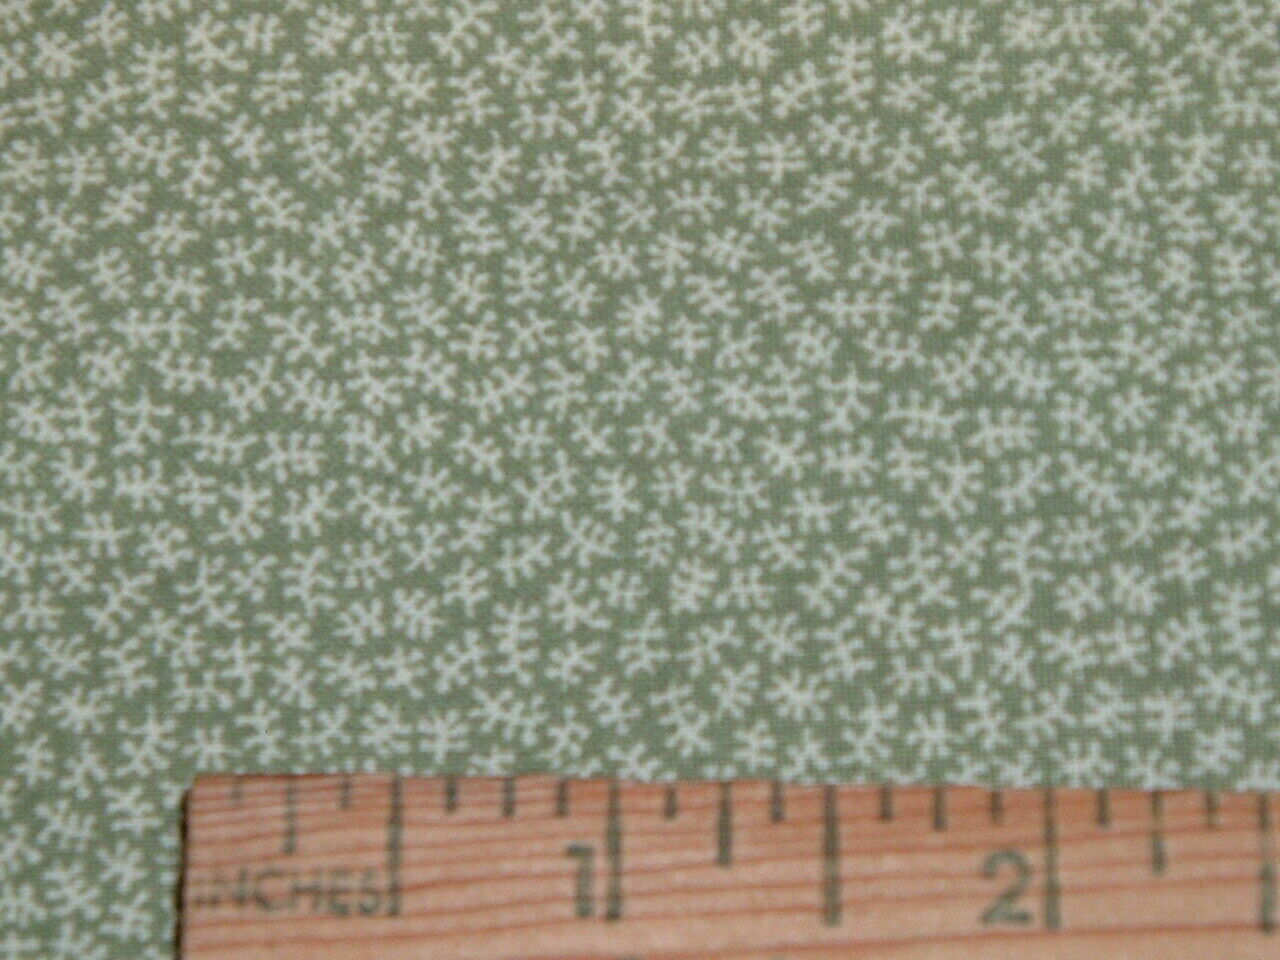 Vtg 2000 Tiny Sage Green Leaves Quilt Sew Fabric Traditions Fabric 36x42 #PB5